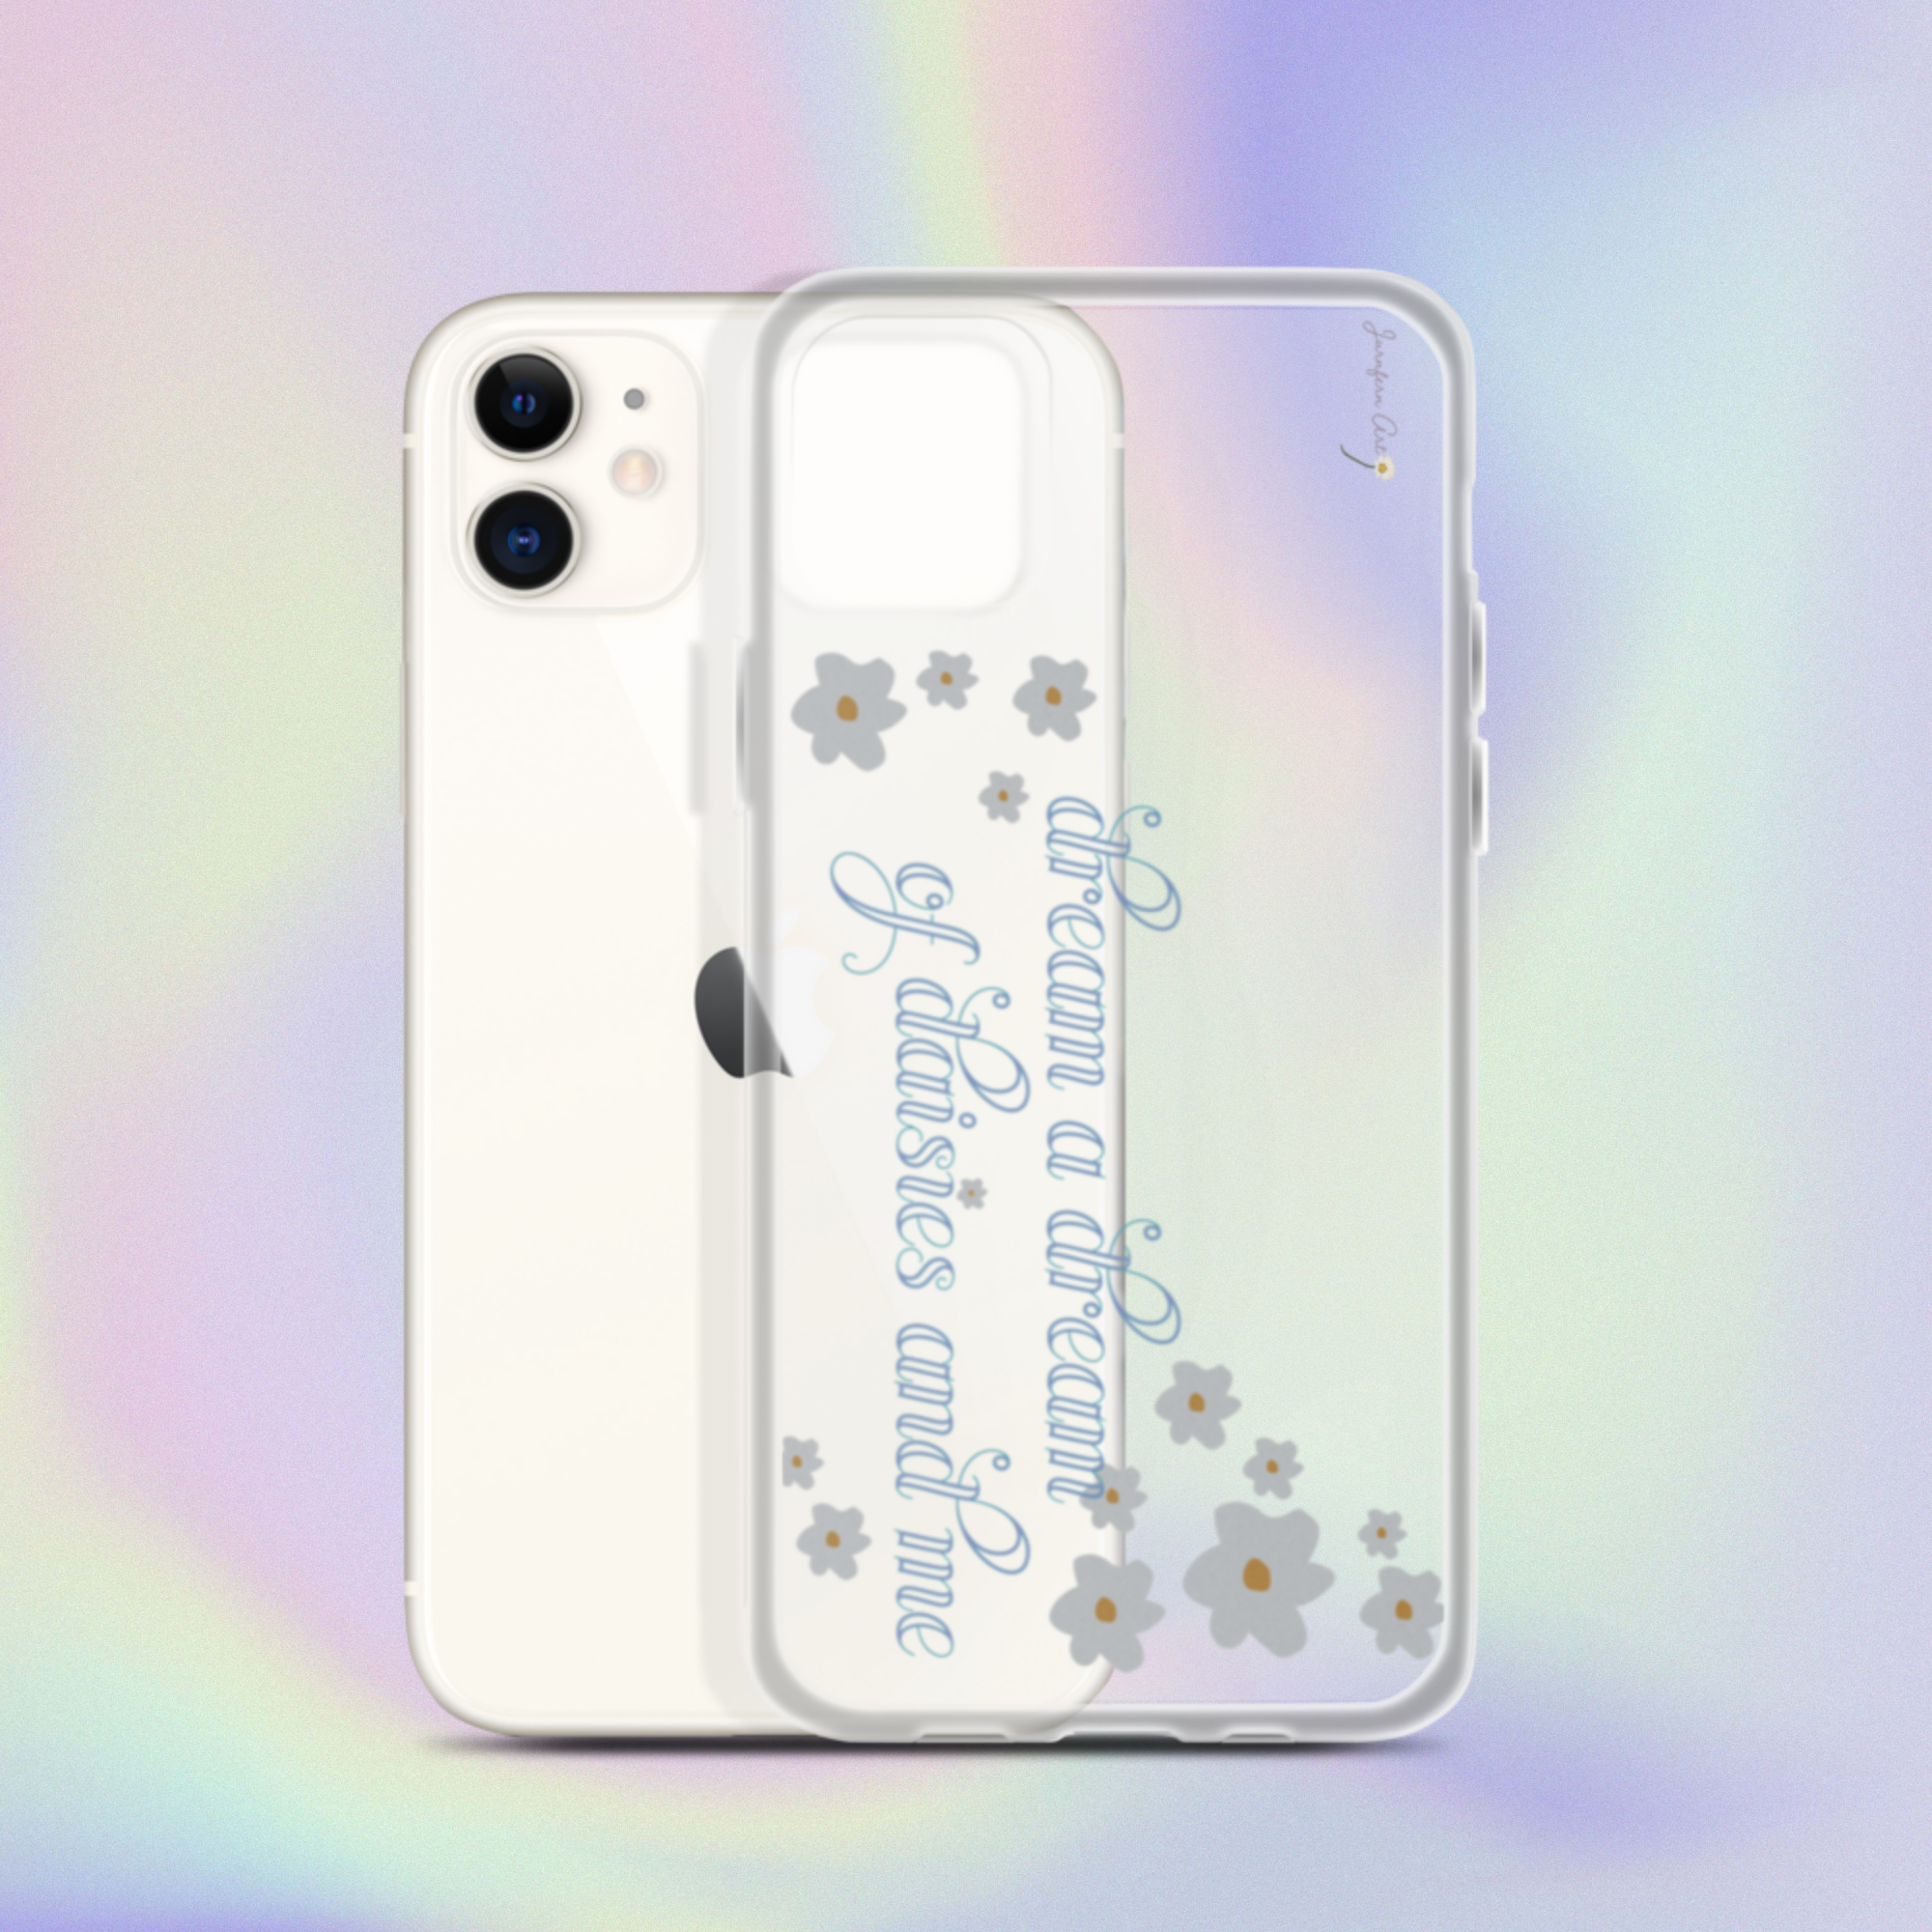 A transparent iPhone 11 case with cursive blue text on it that reads "dream a dream of daisies and me" surrounded by small daisies